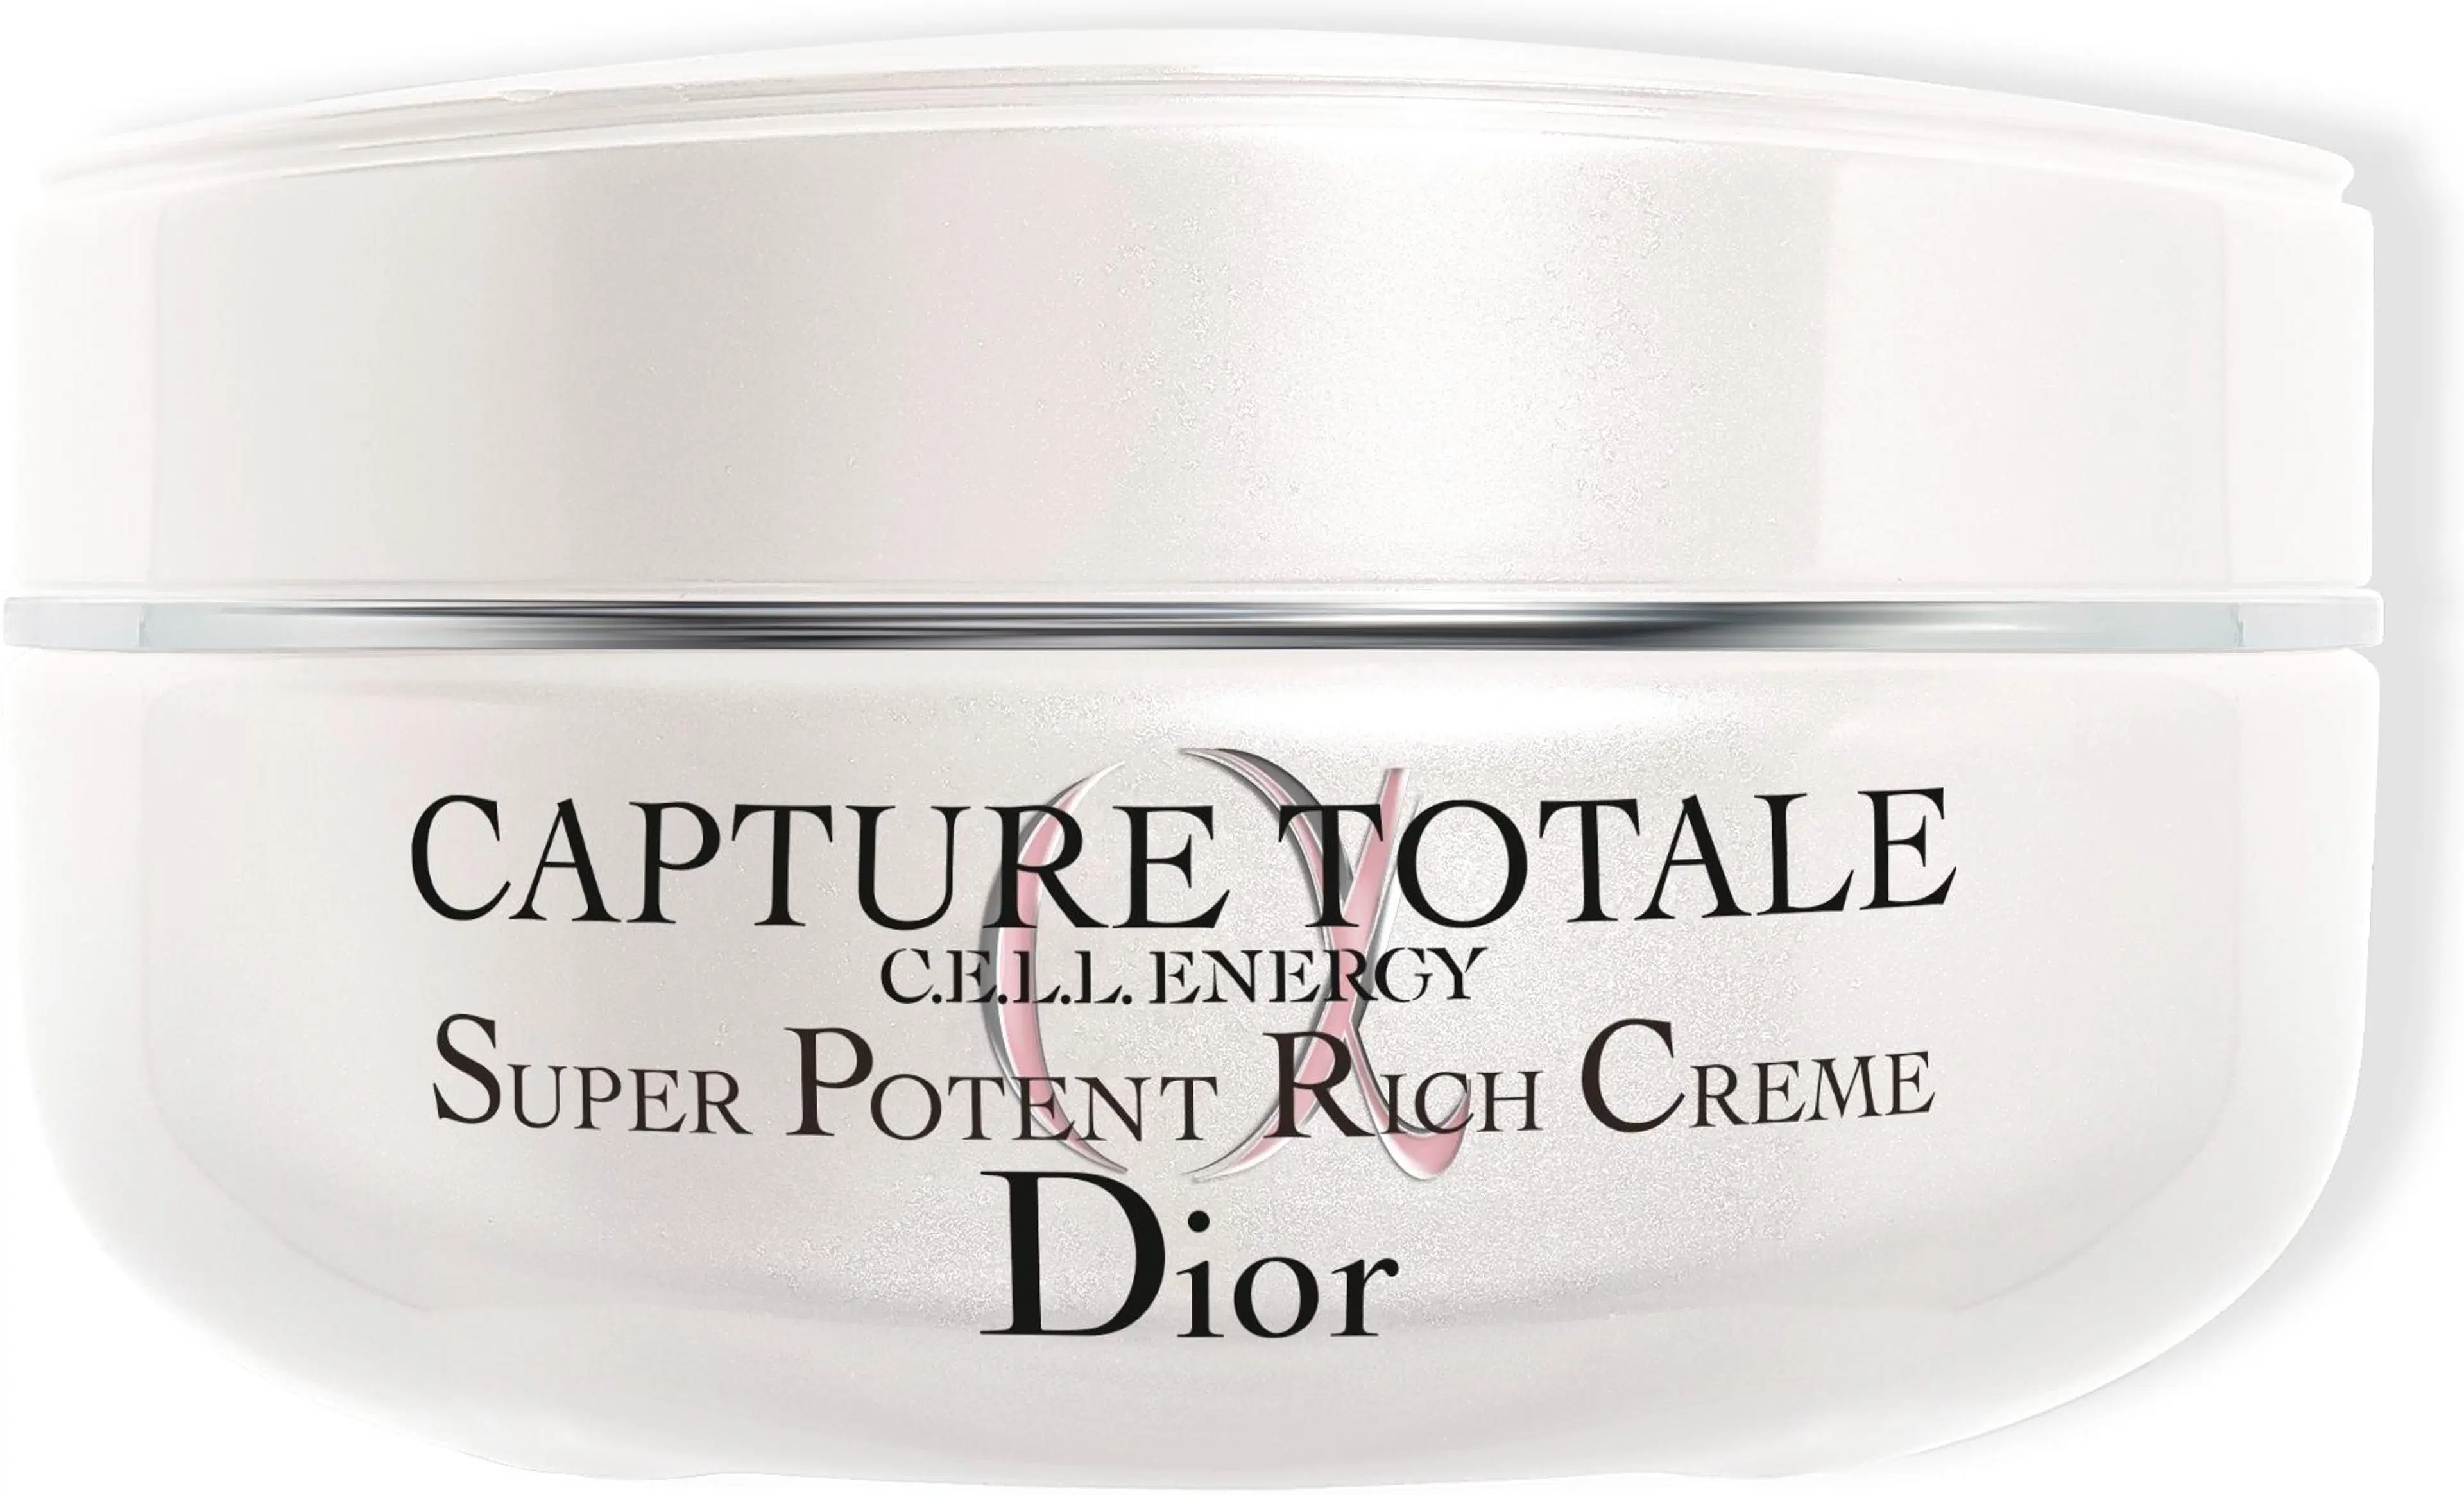 DIOR Capture totale cell energy rich creme kasvovoide 50 ml